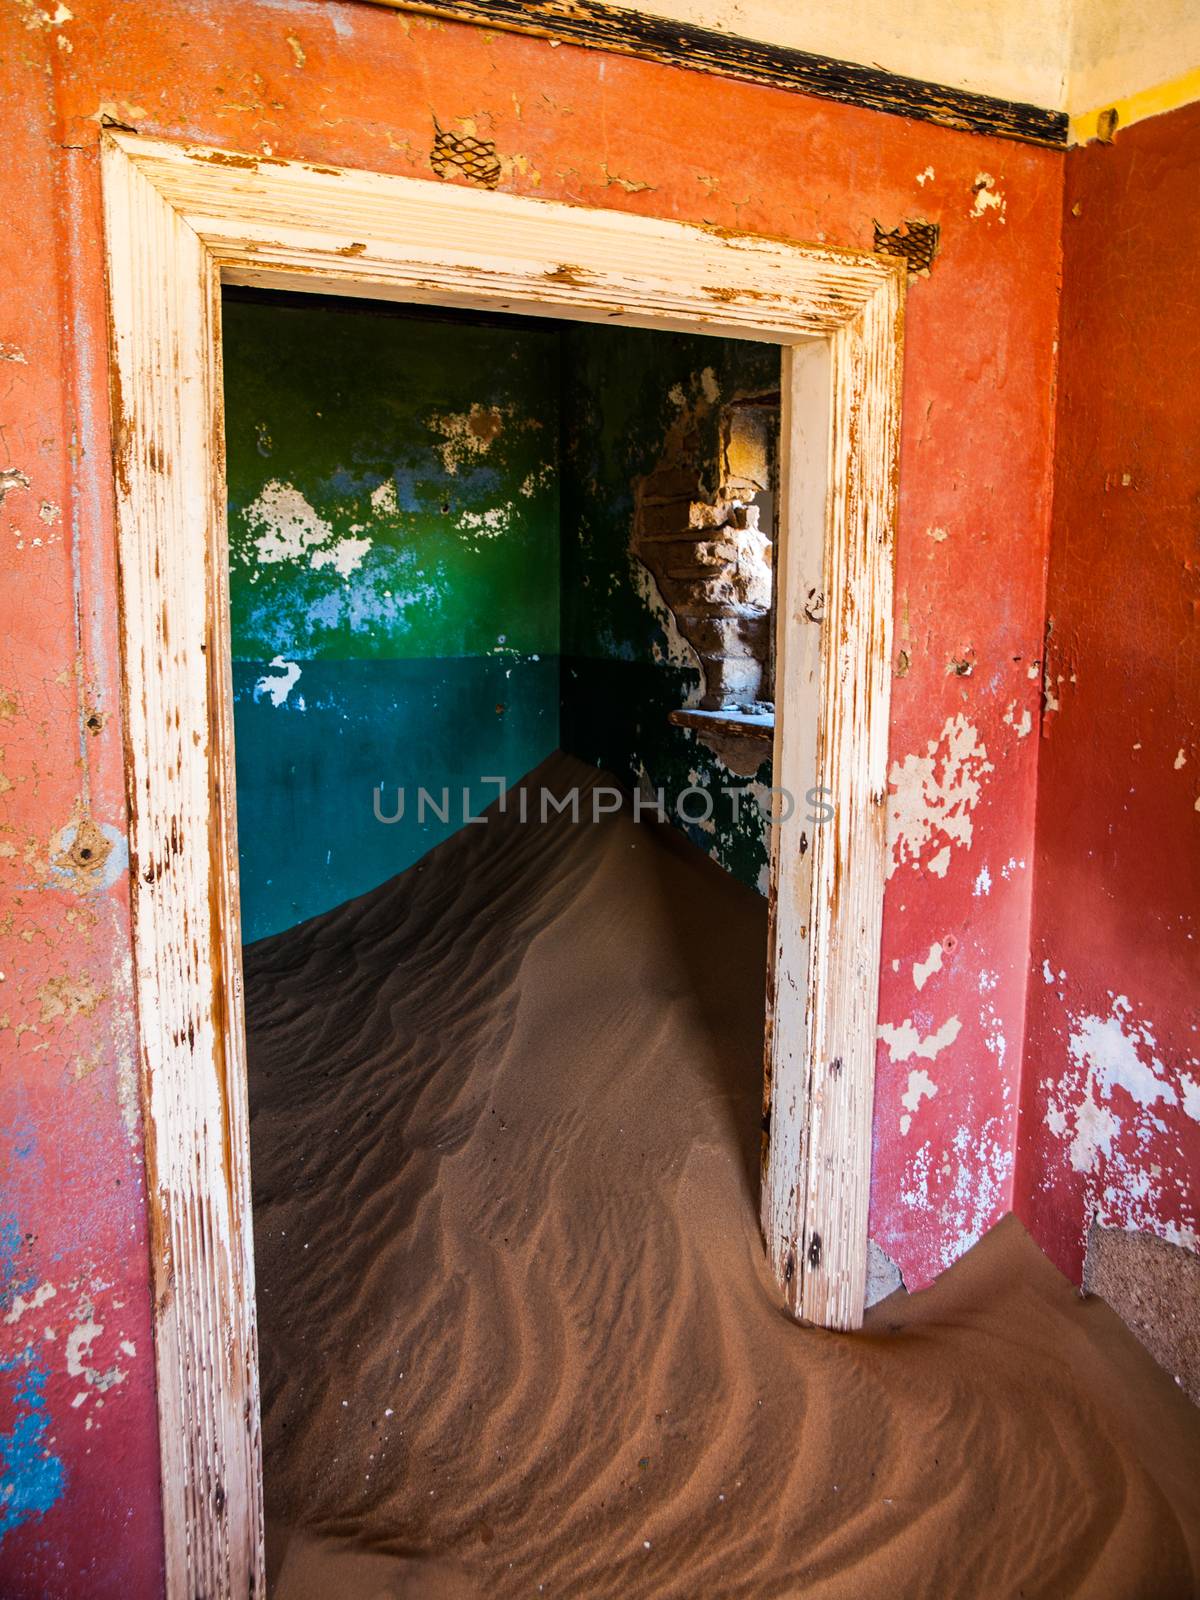 Sand in abandoned house in Kolmanskop ghost town (Namibia)